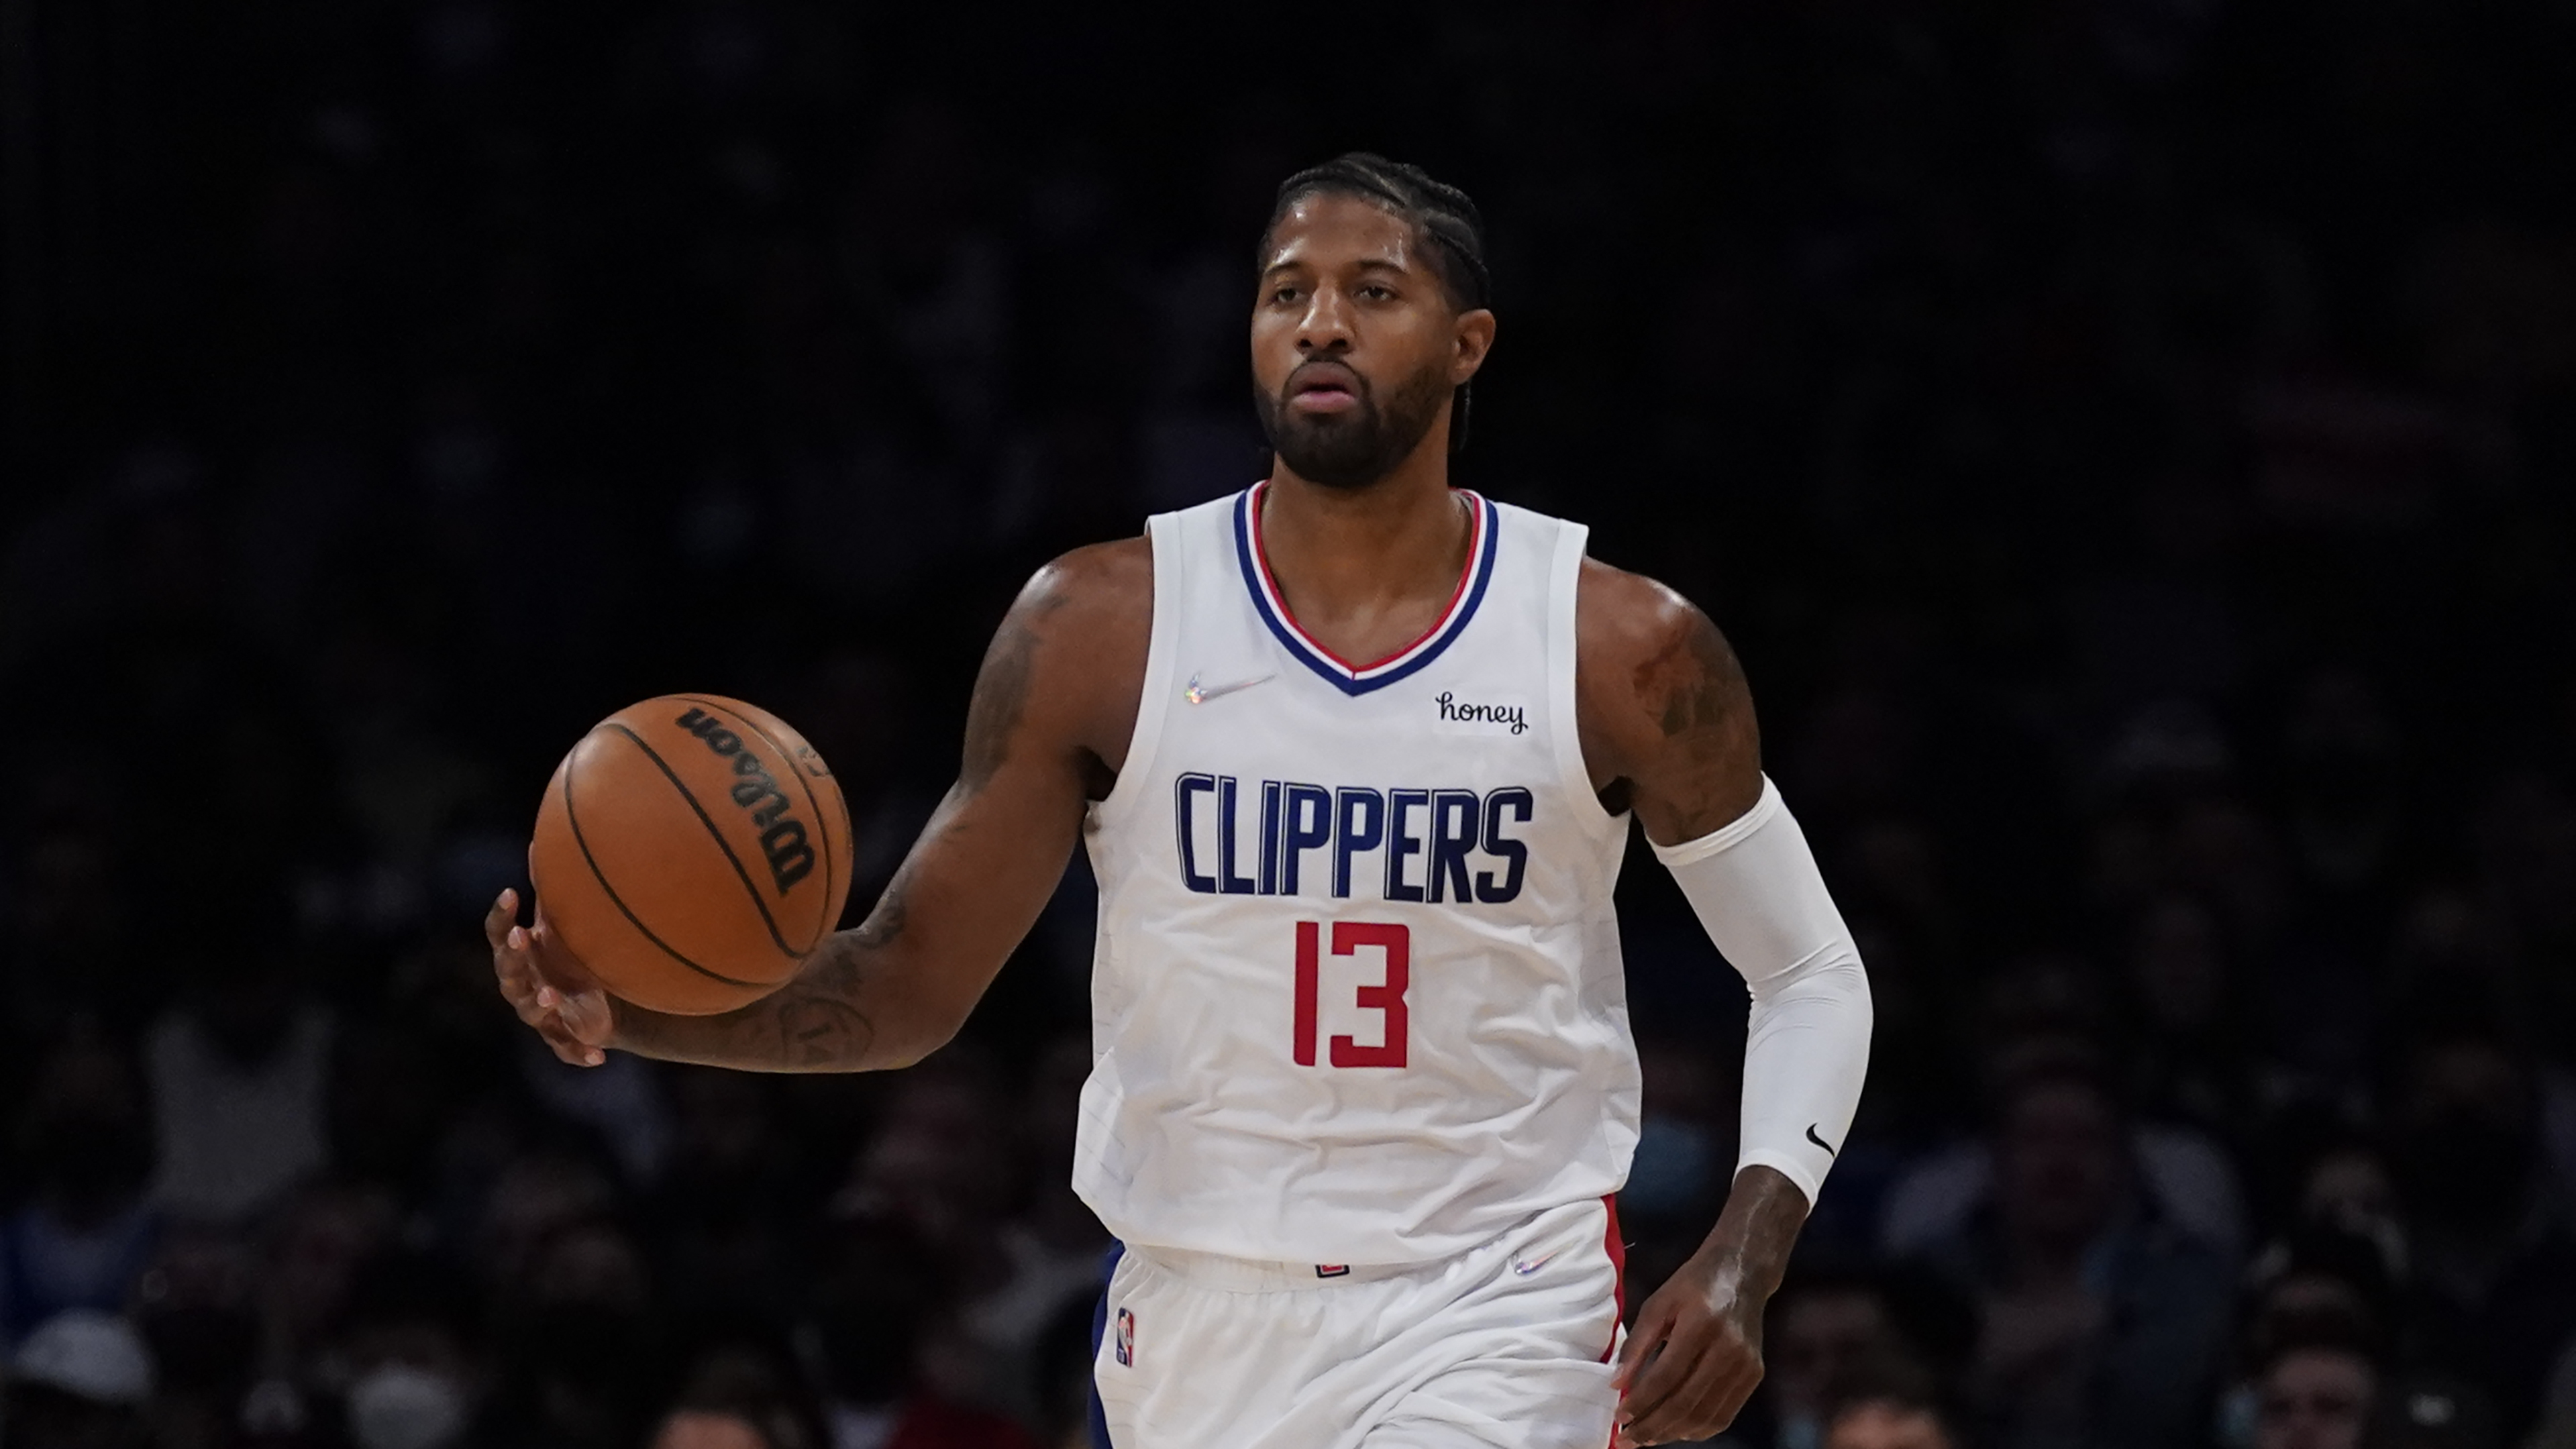 Clippers' Paul George Has Torn UCL in Elbow; Injury to Be Reevaluated in 3-4 Weeks